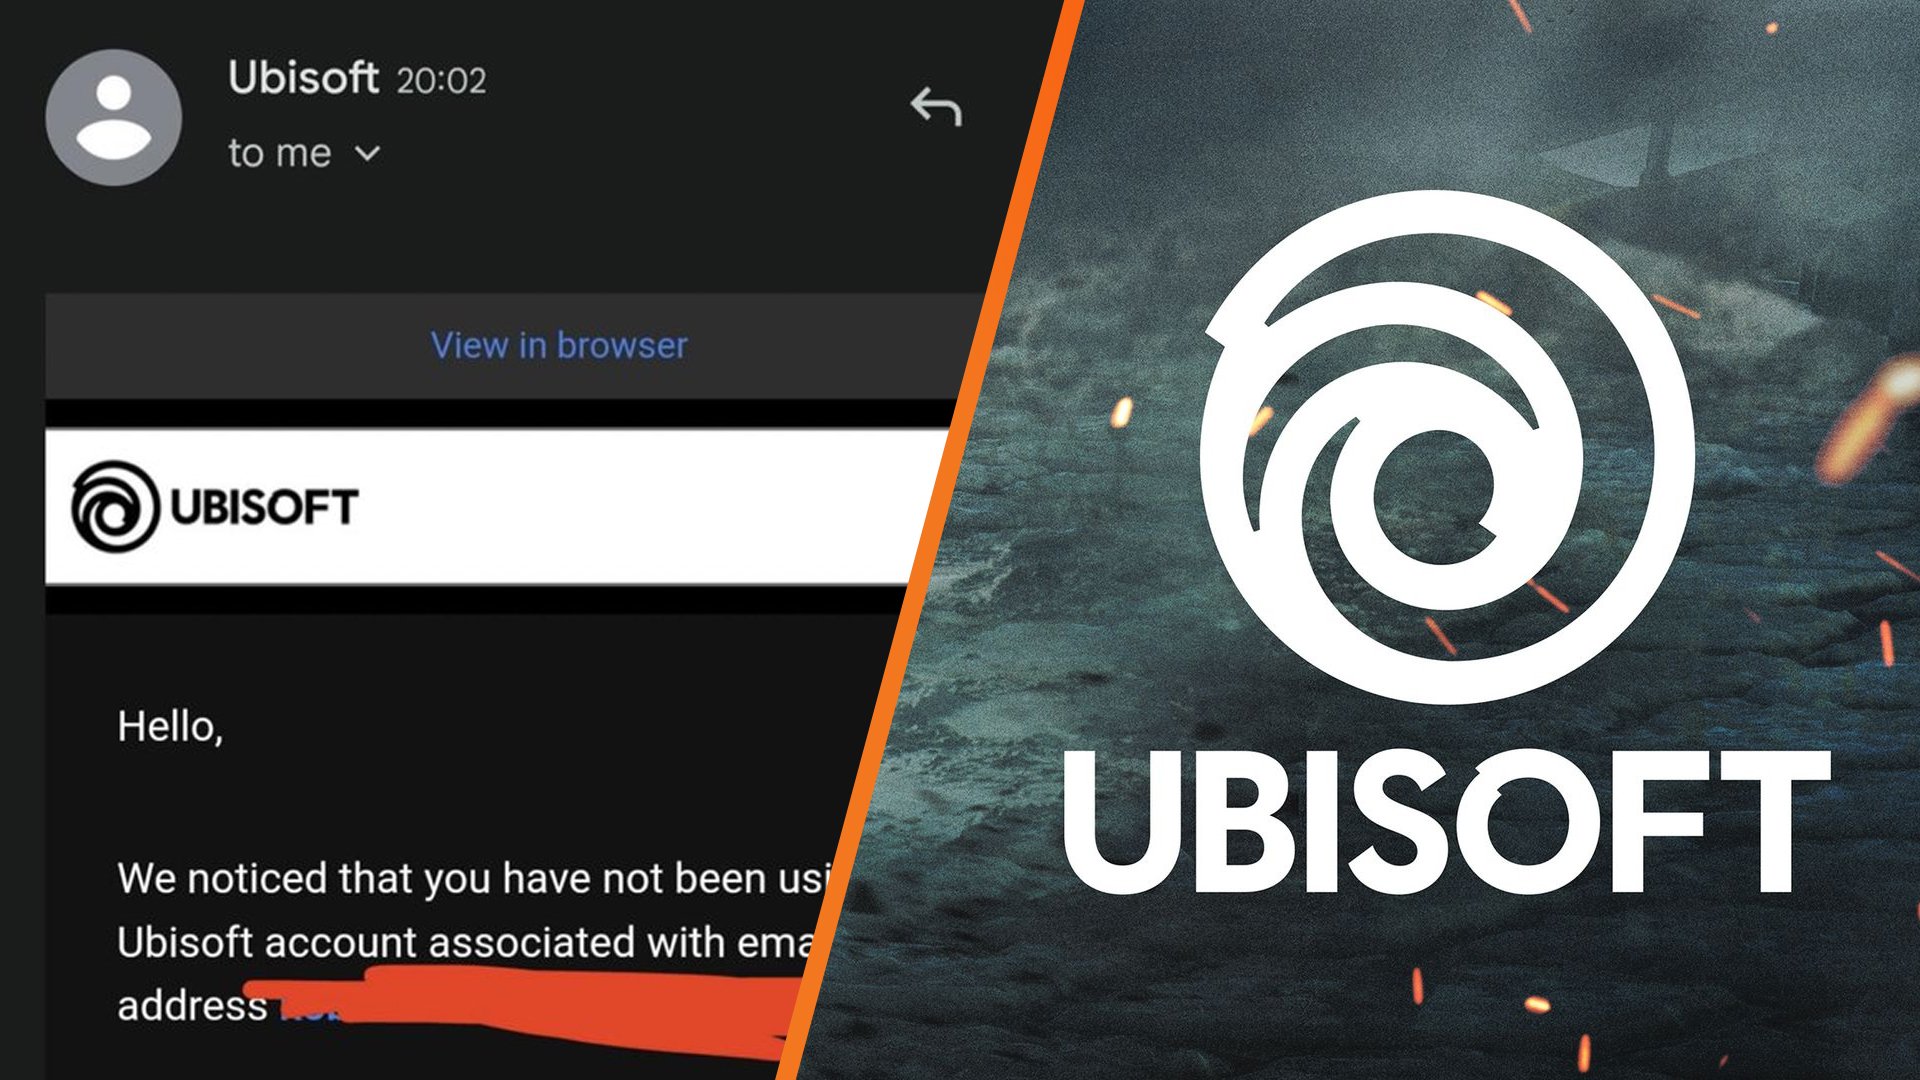 Ubisoft closes “unused” accounts and disables access to purchased games